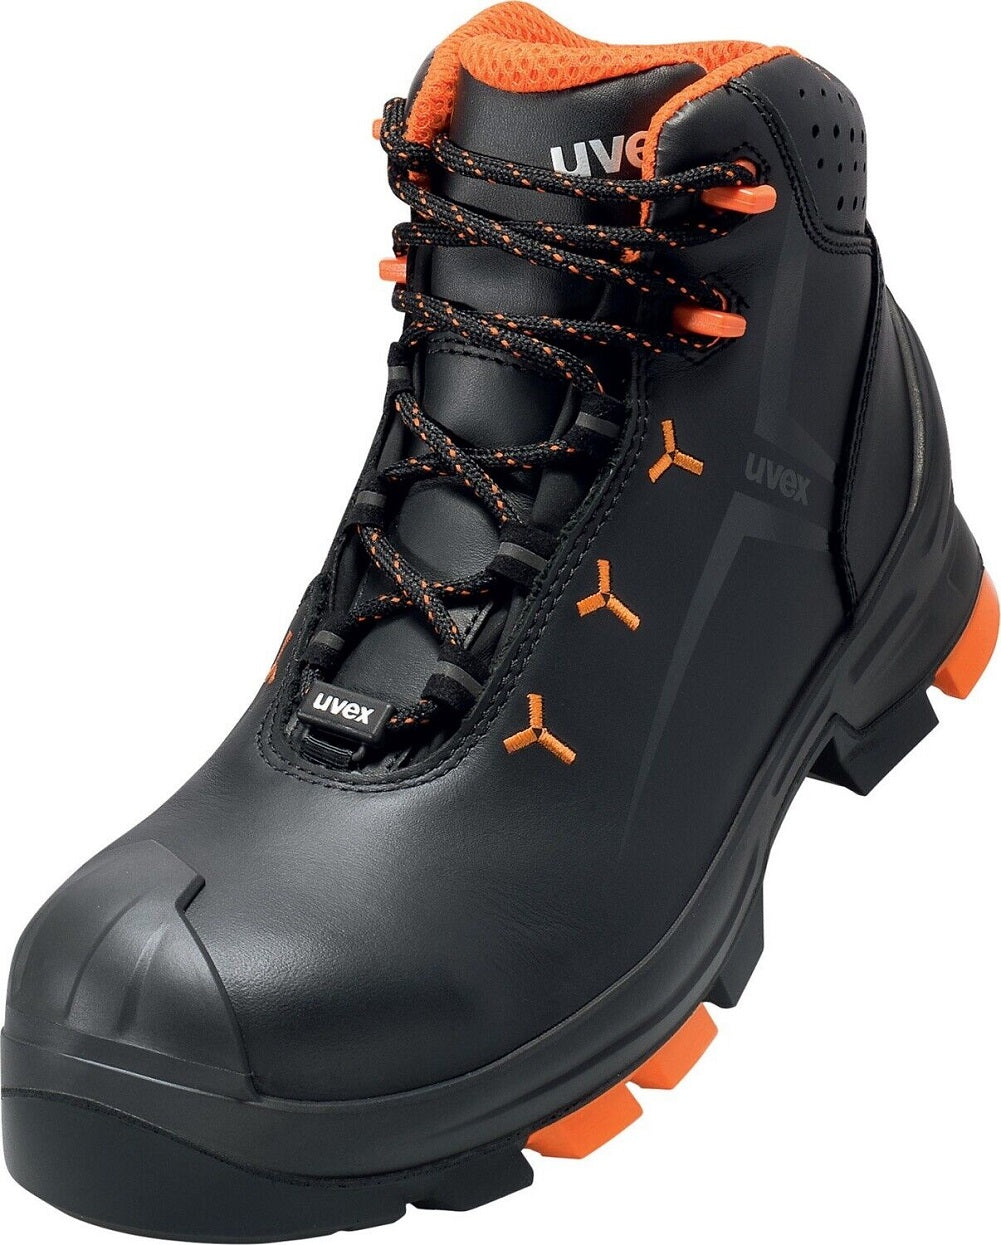 uvex 2 safety boots 65032 S3 SRC Black Leather Upper With Orange Detail. PU Sole. meets ESD Requirements. protexU